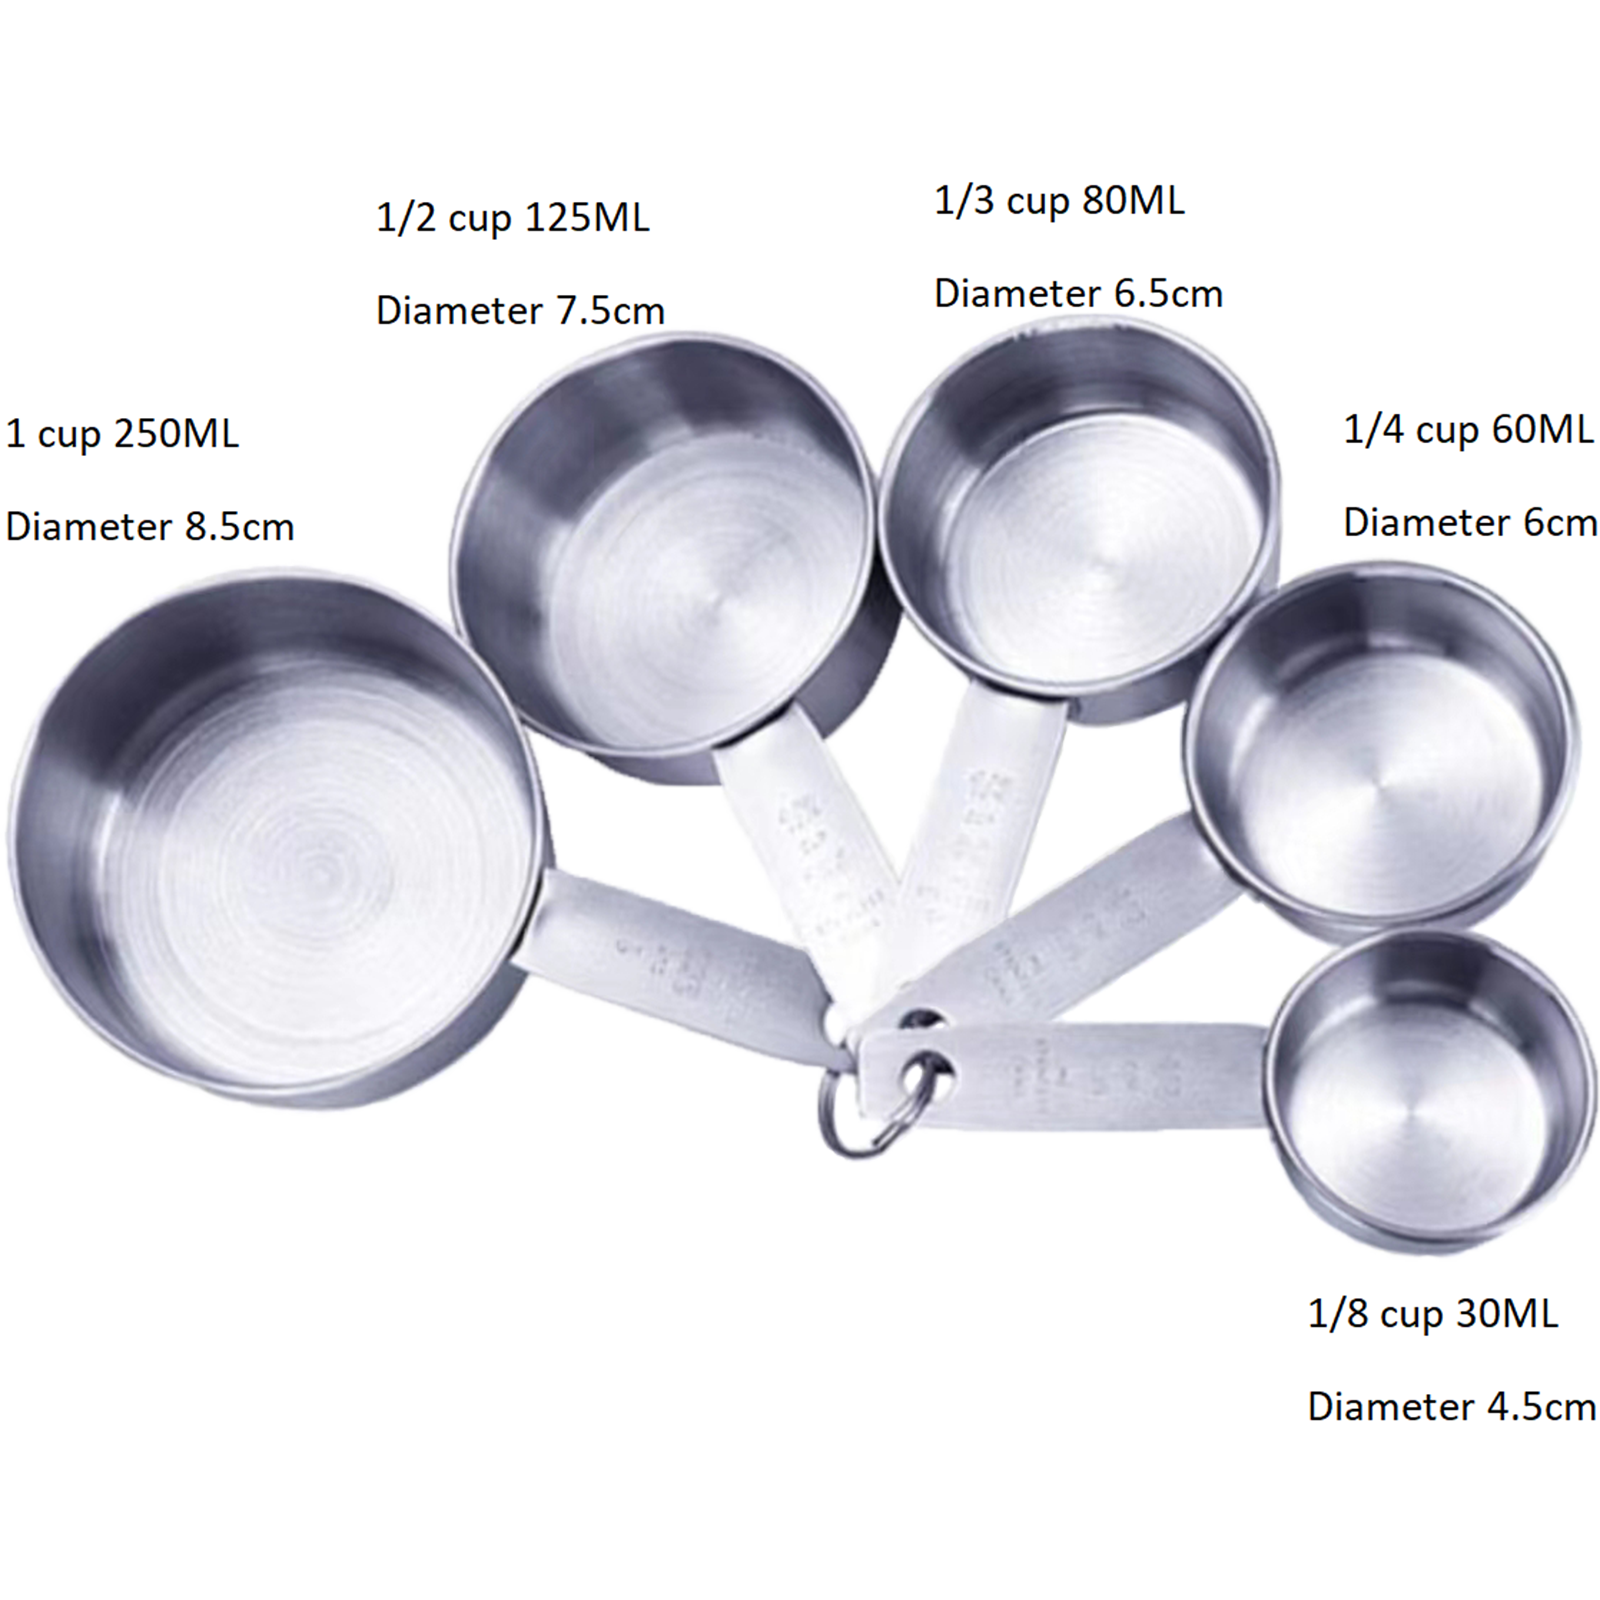 Stainless Steel Measuring Spoons and Cups Set